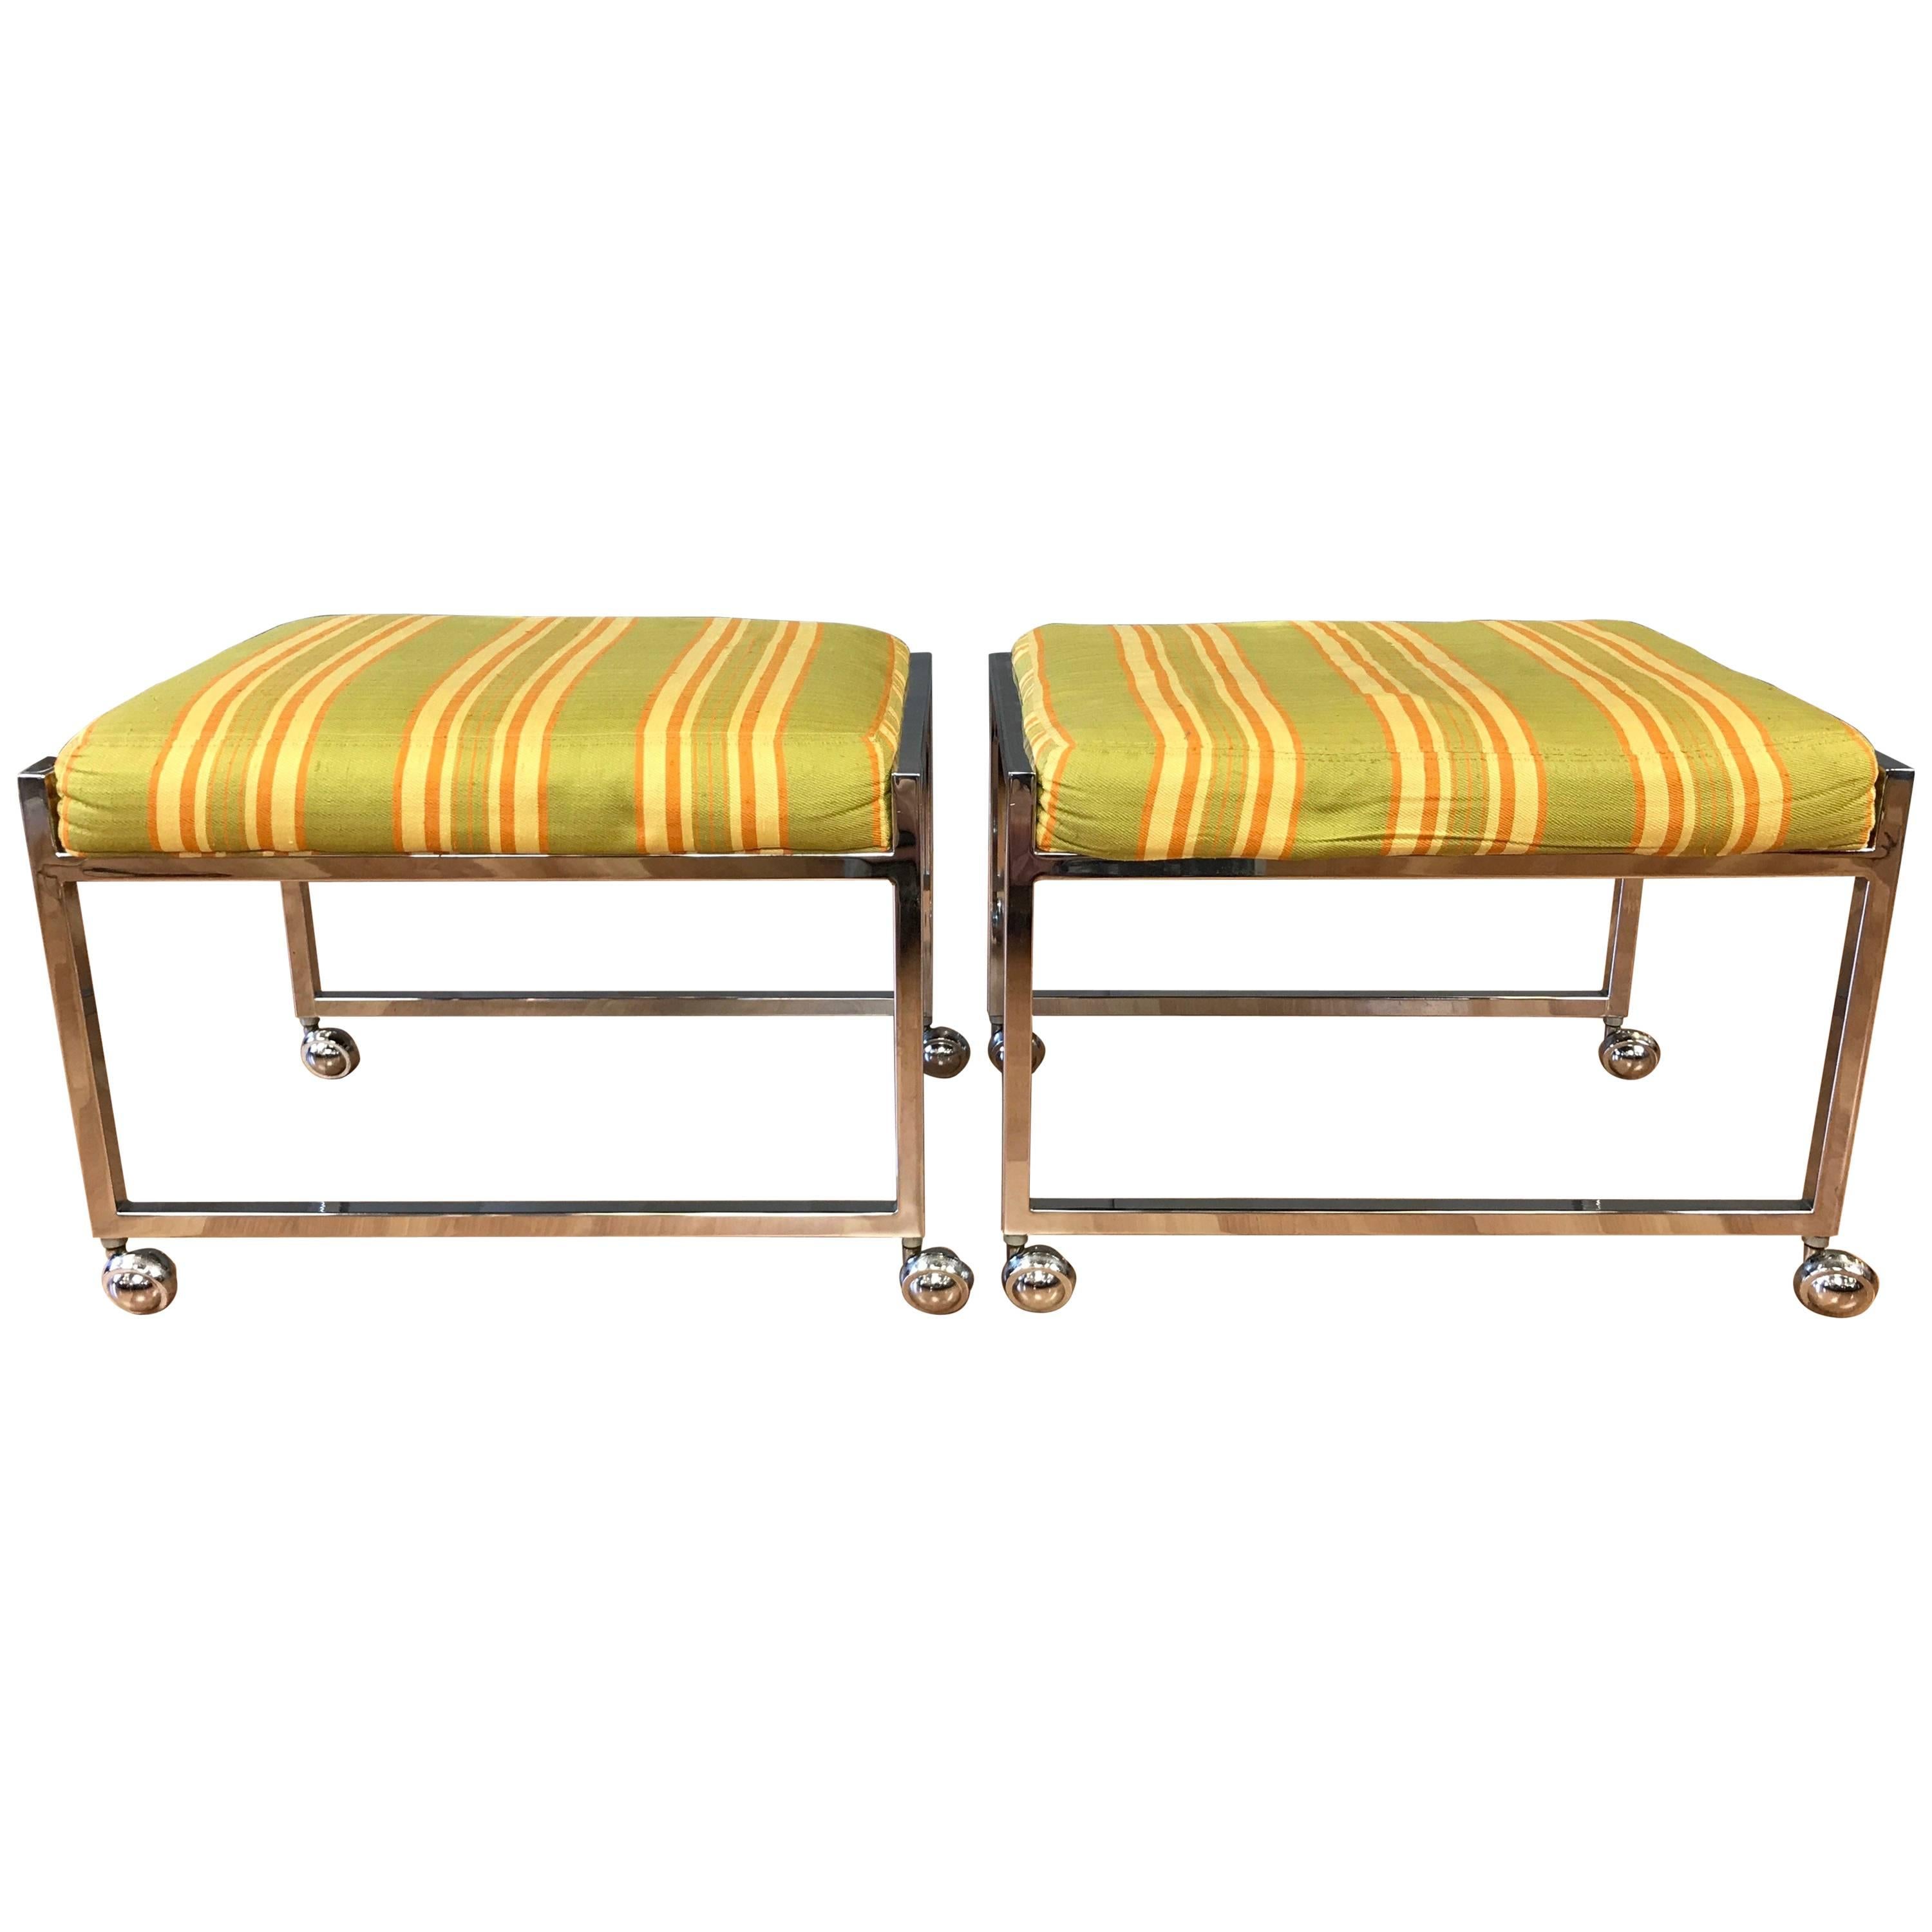 Pair of Vintage Milo Baughman-Style Small Wheeled Benches